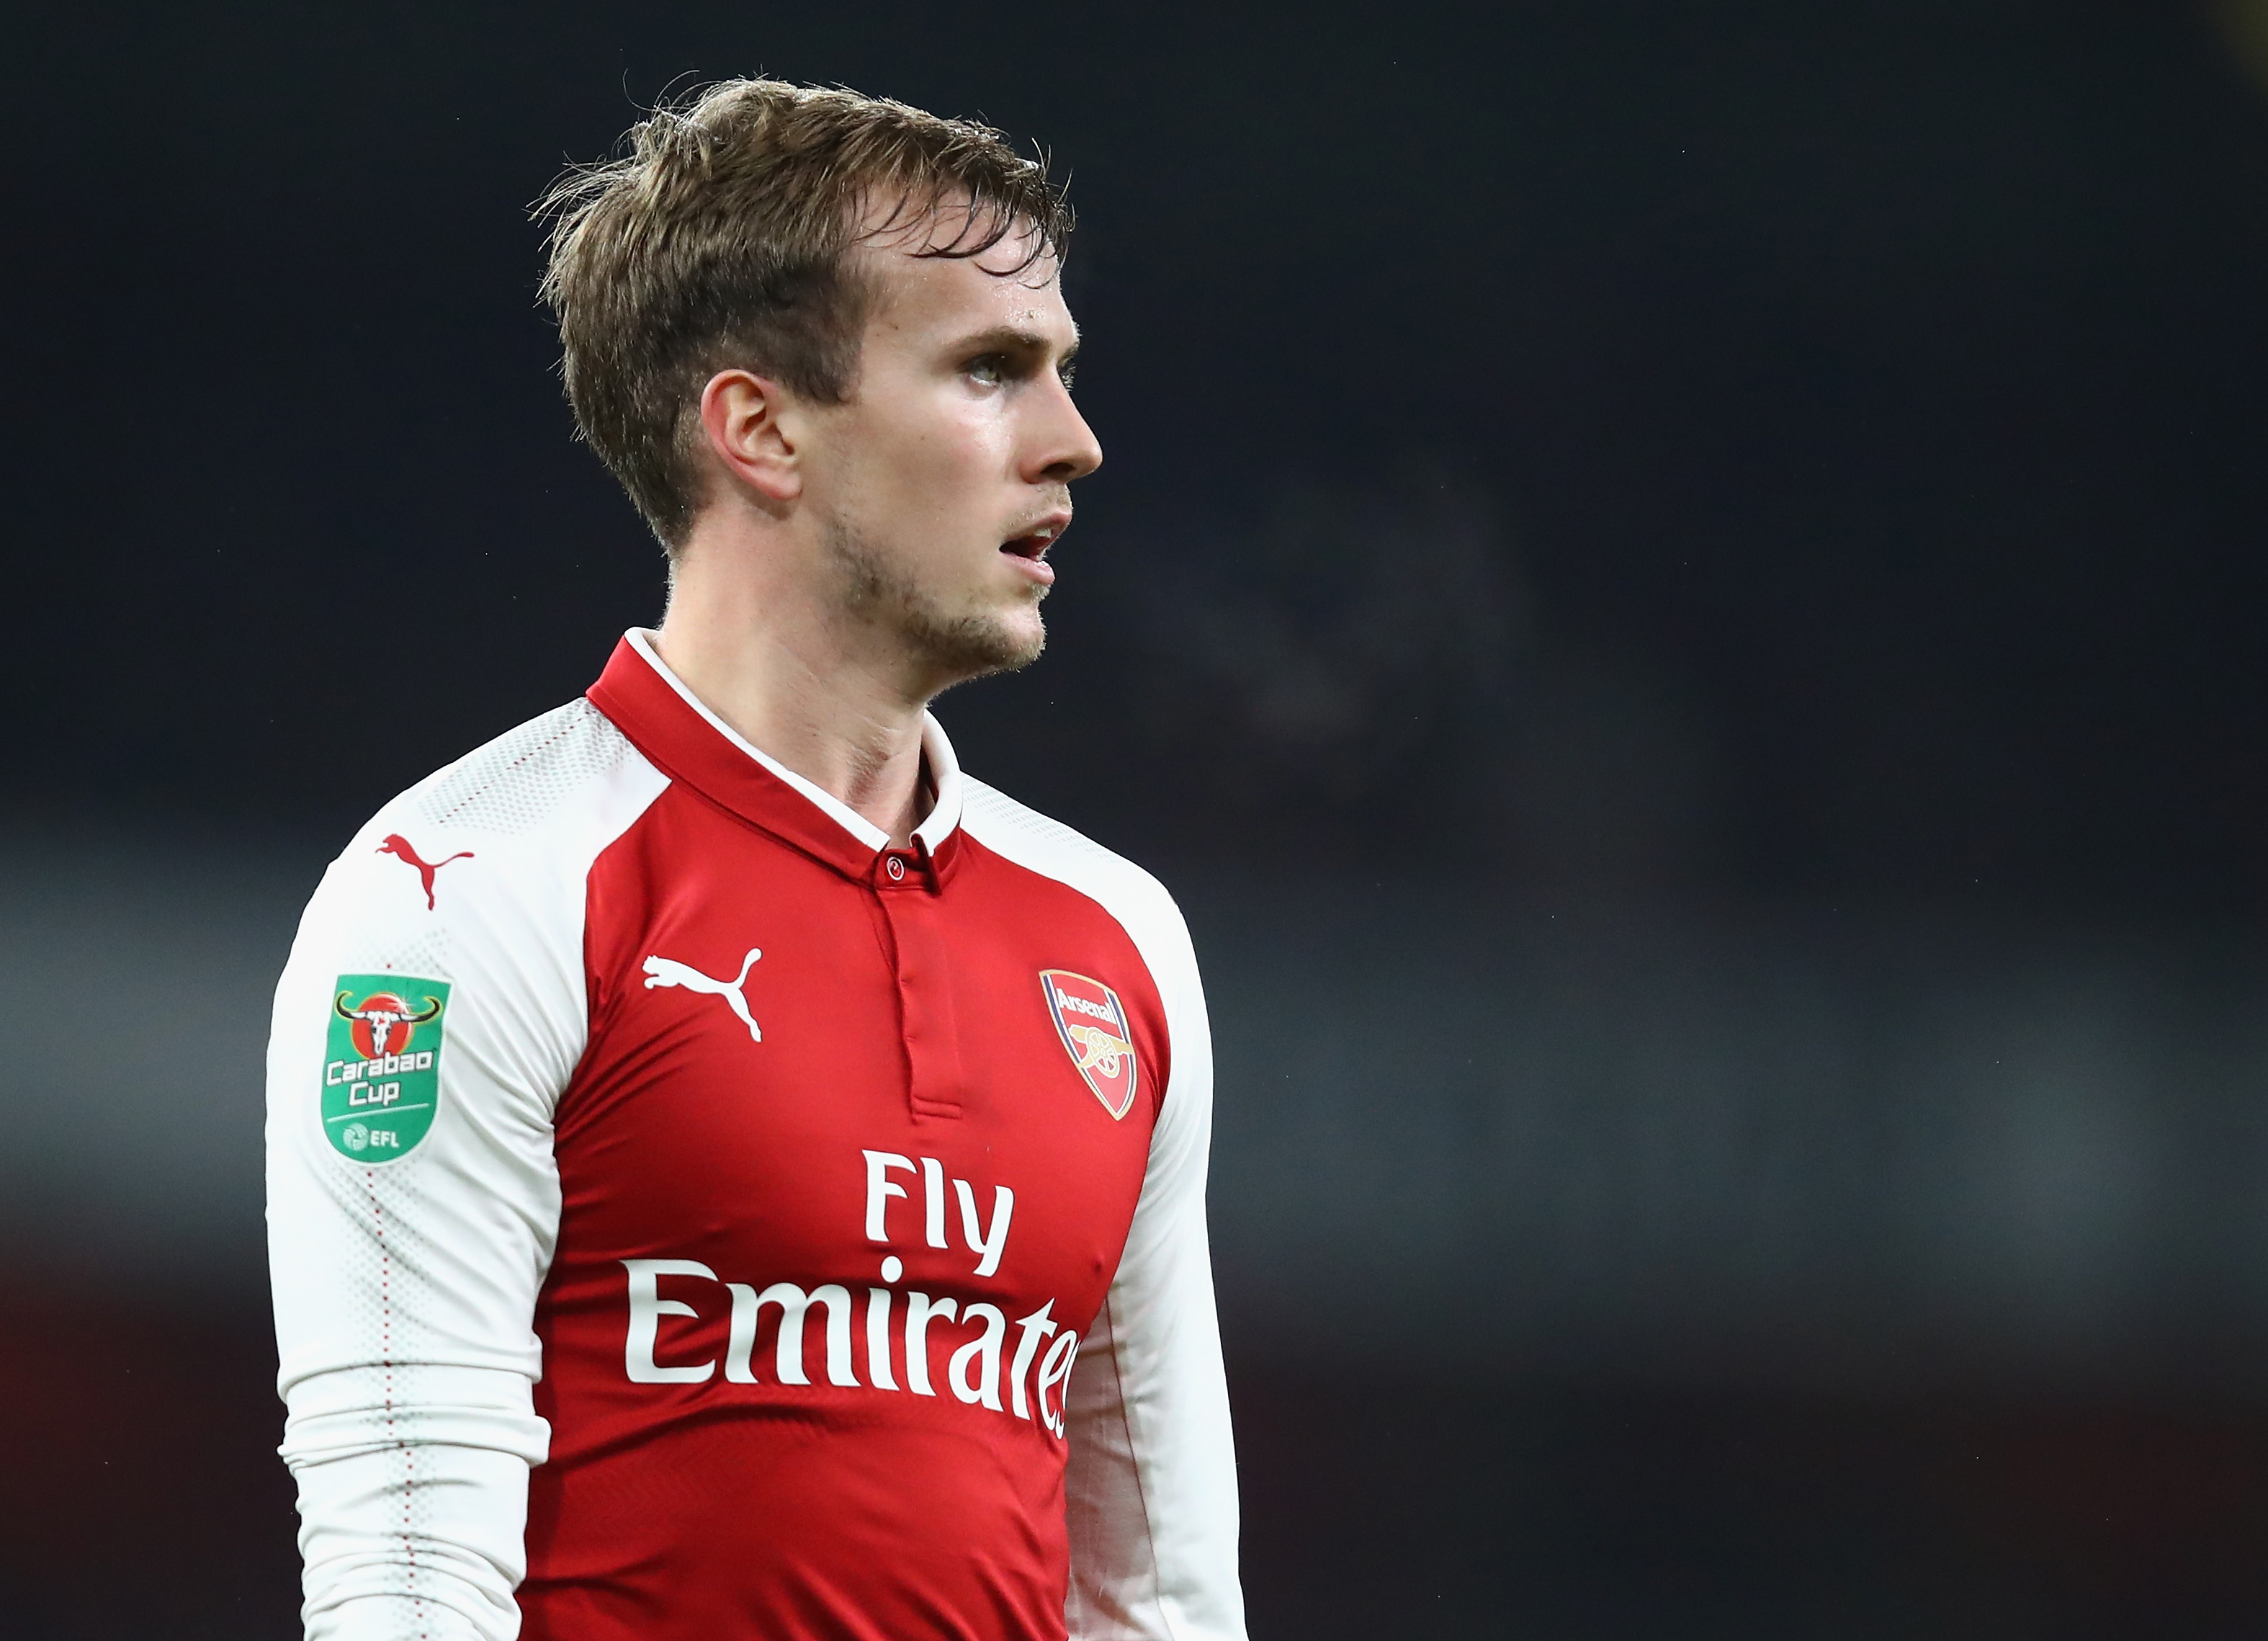 LONDON, ENGLAND - DECEMBER 19:  Rob Holding of Arsenal in action during the Carabao Cup Quarter Finals match between Arsenal and West Ham United at Emirates Stadium on December 19, 2017 in London, England.  (Photo by Julian Finney/Getty Images)